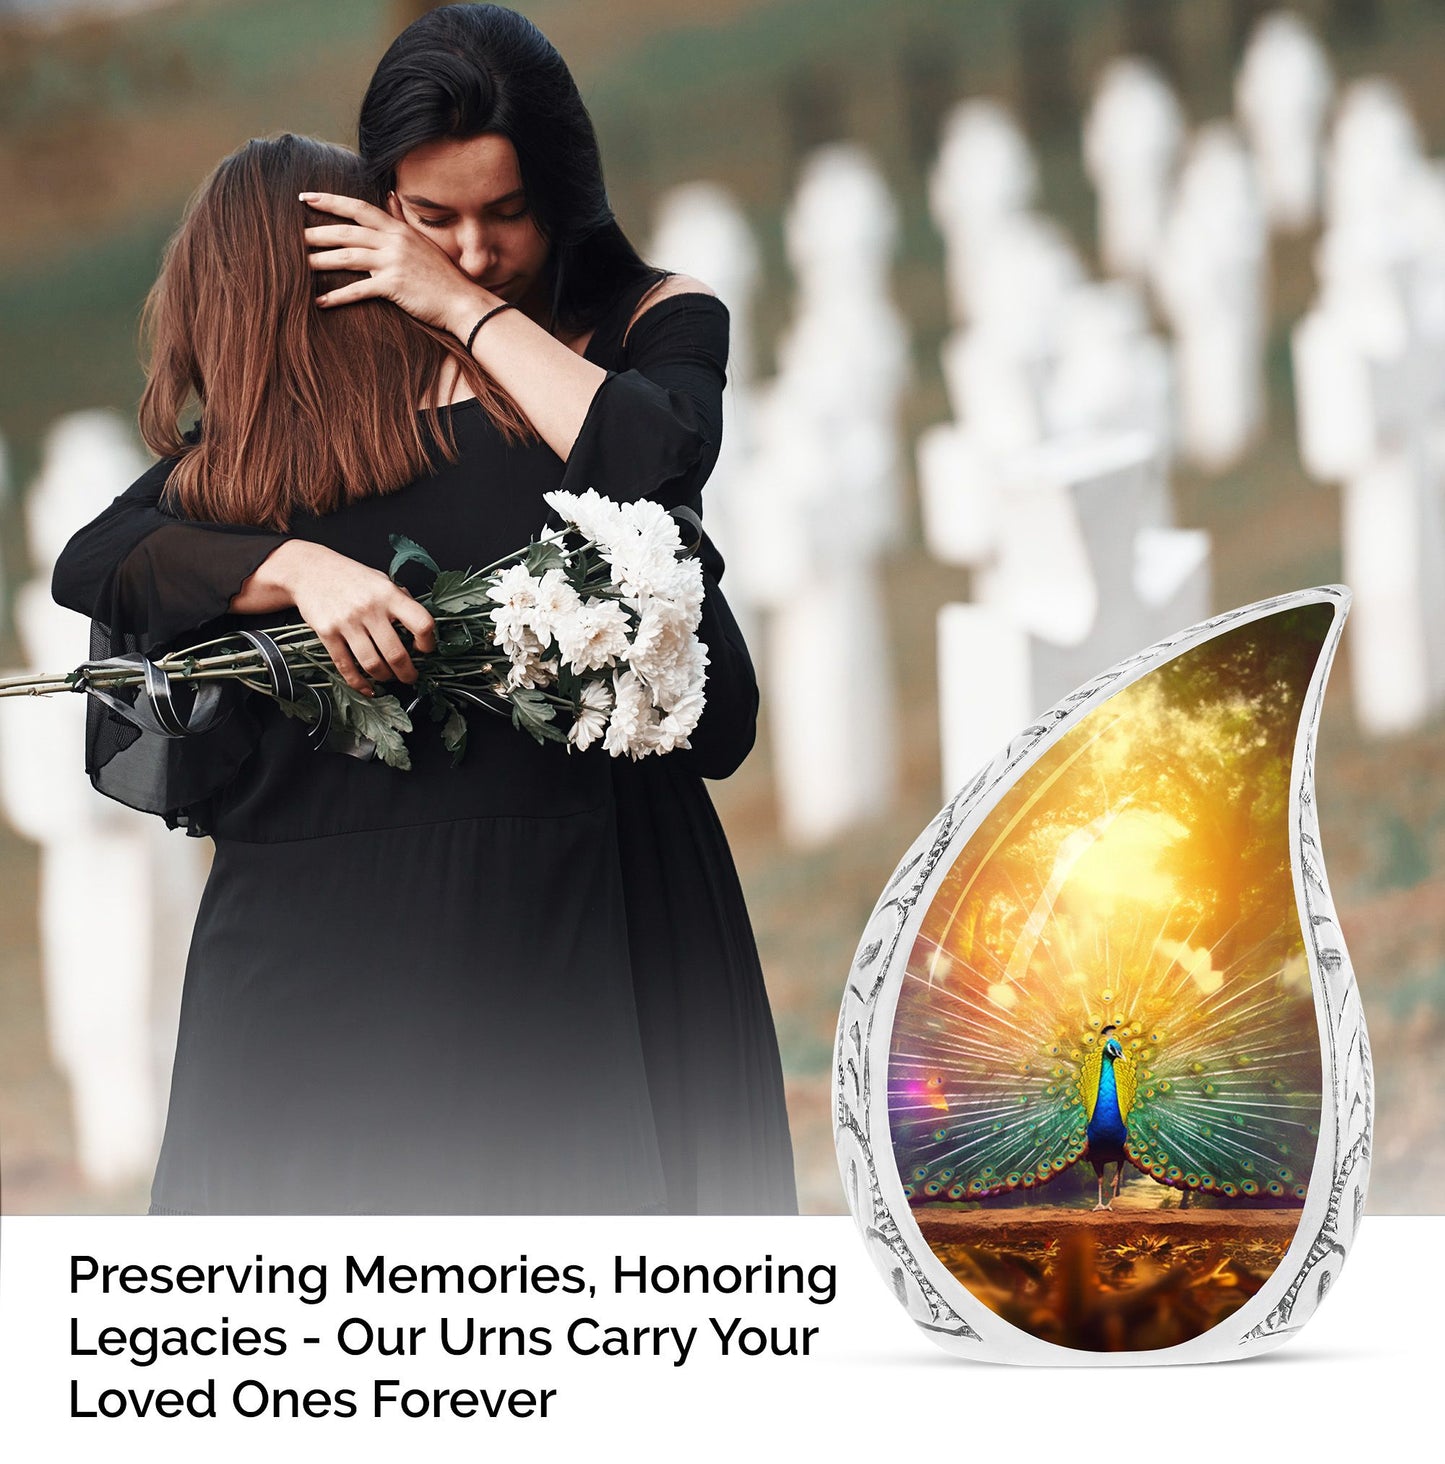 Large, artistic peacock themed funeral urn for adults, perfect for storing ashes with dignity and elegance